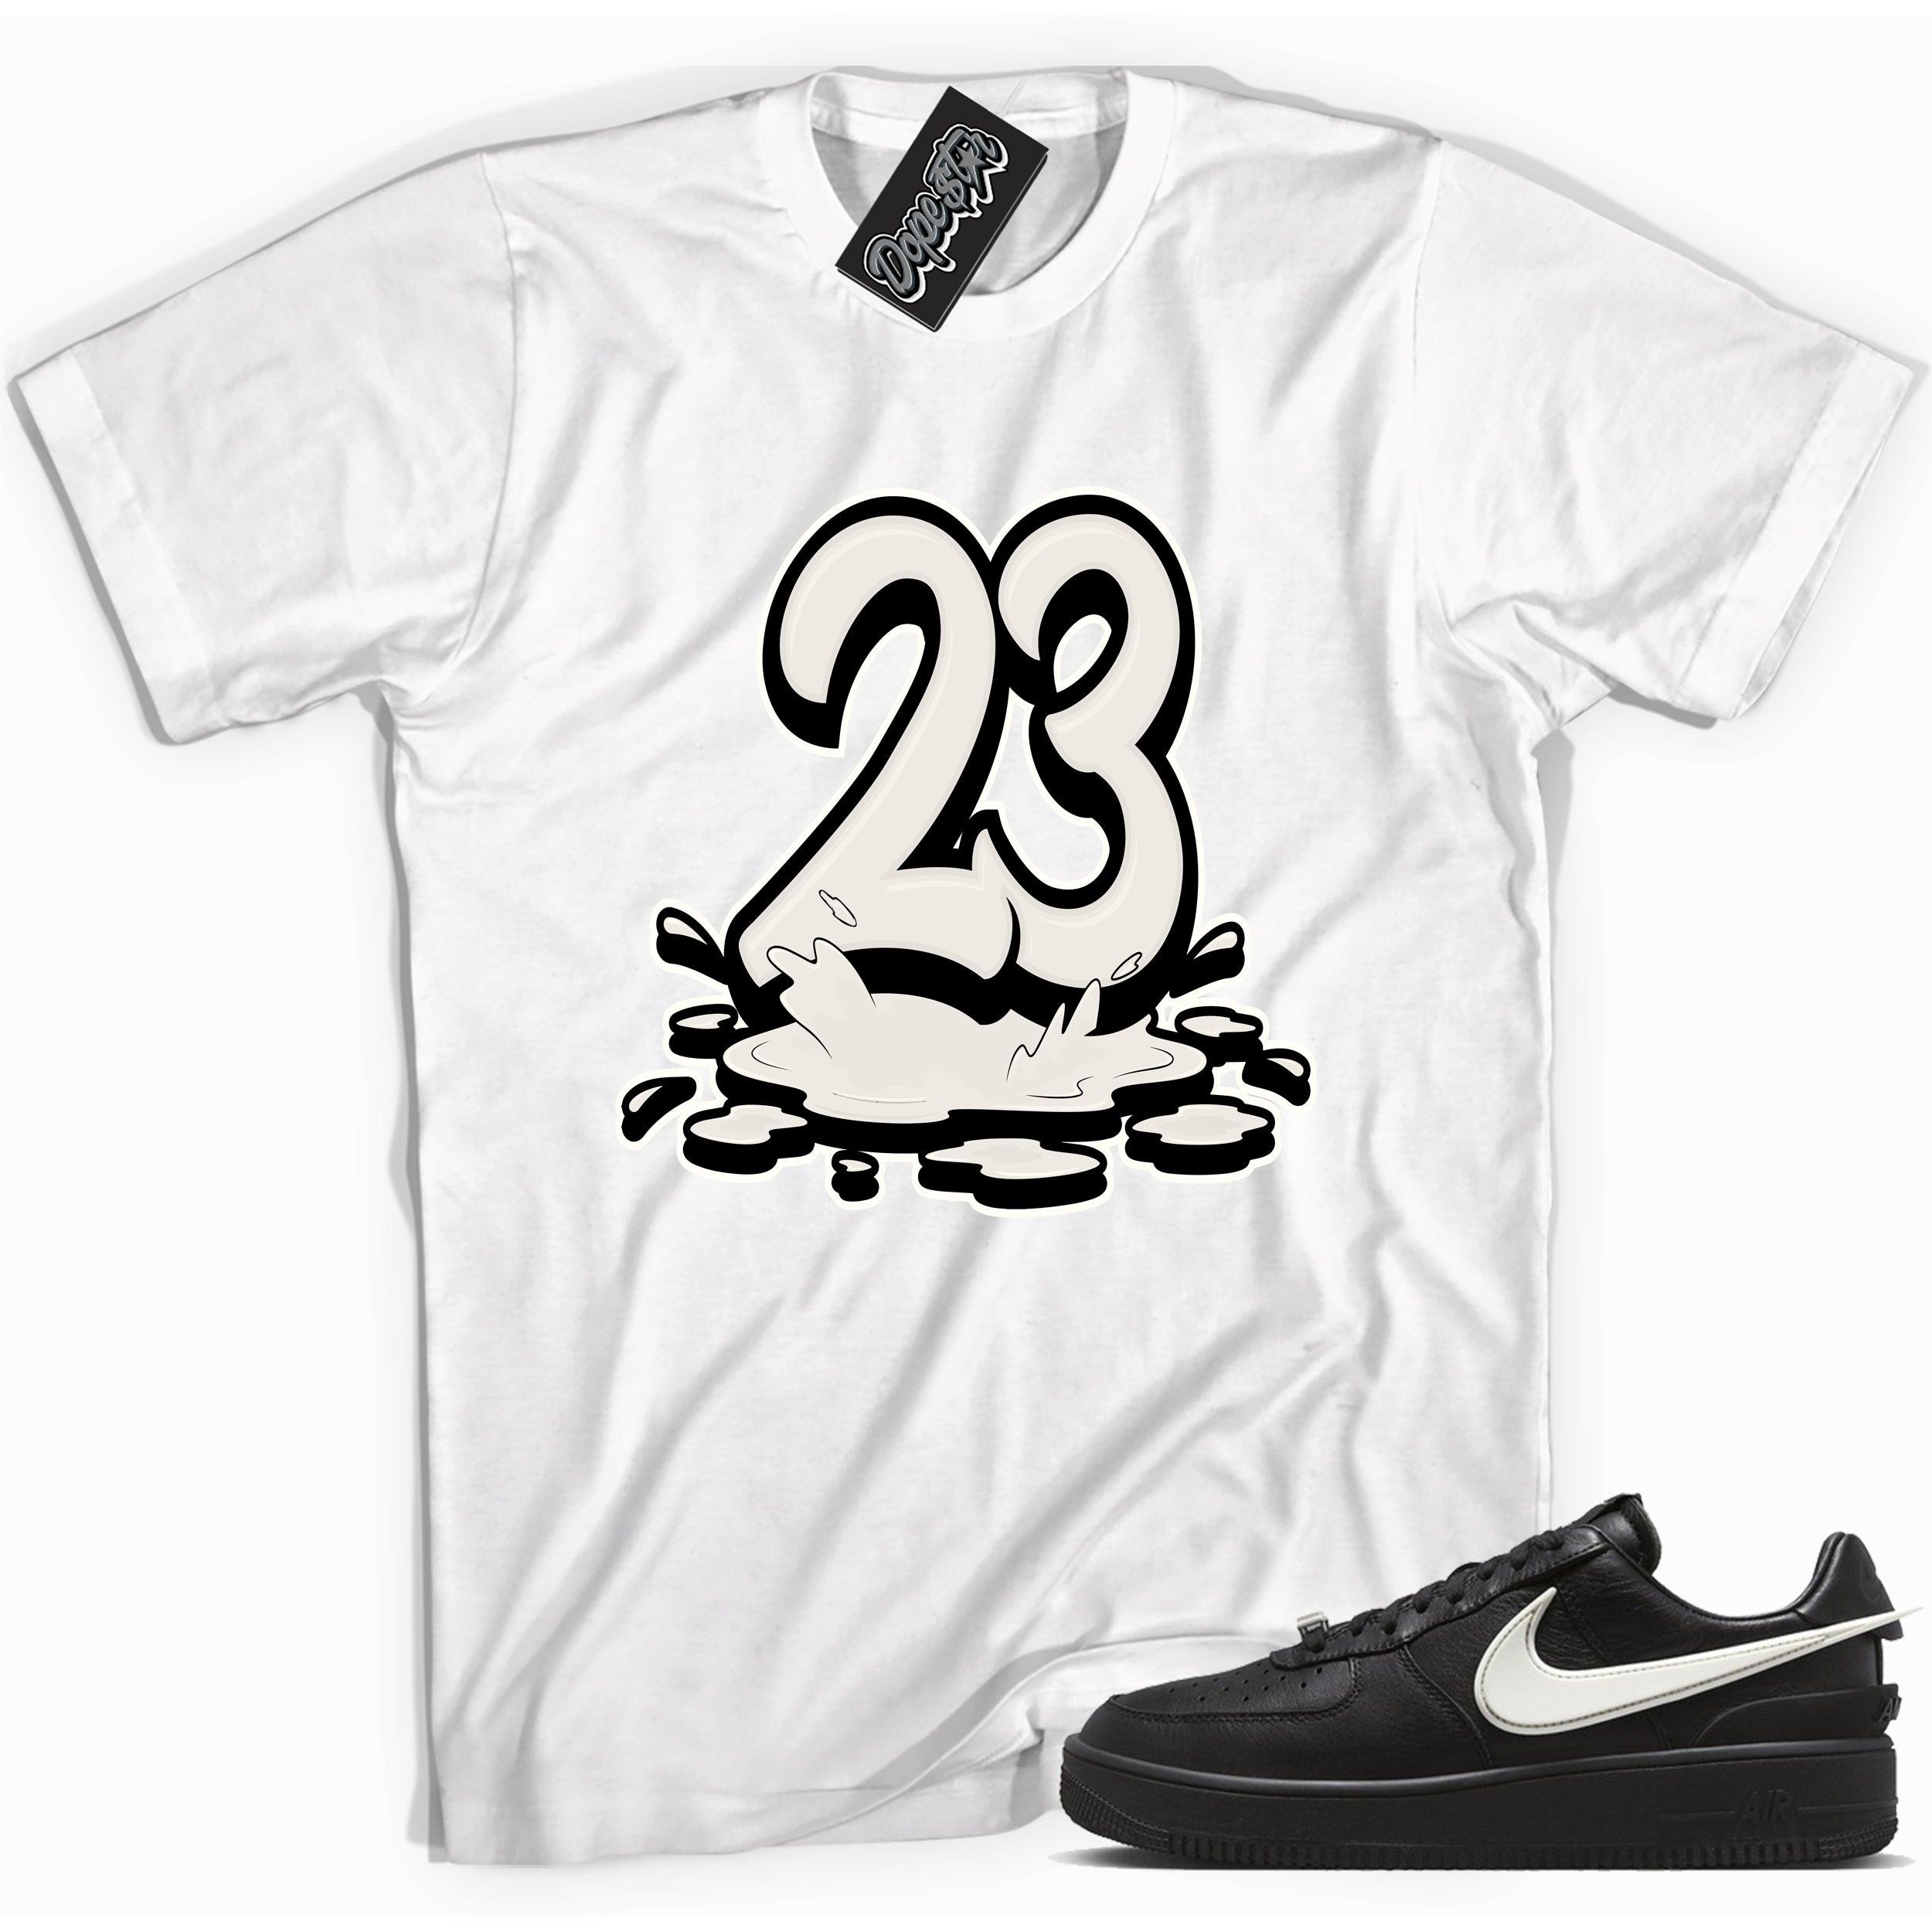 Cool white graphic tee with '23 melting twenty three melting' print, that perfectly matches Nike Air Force 1 Low SP Ambush Phantom sneakers.